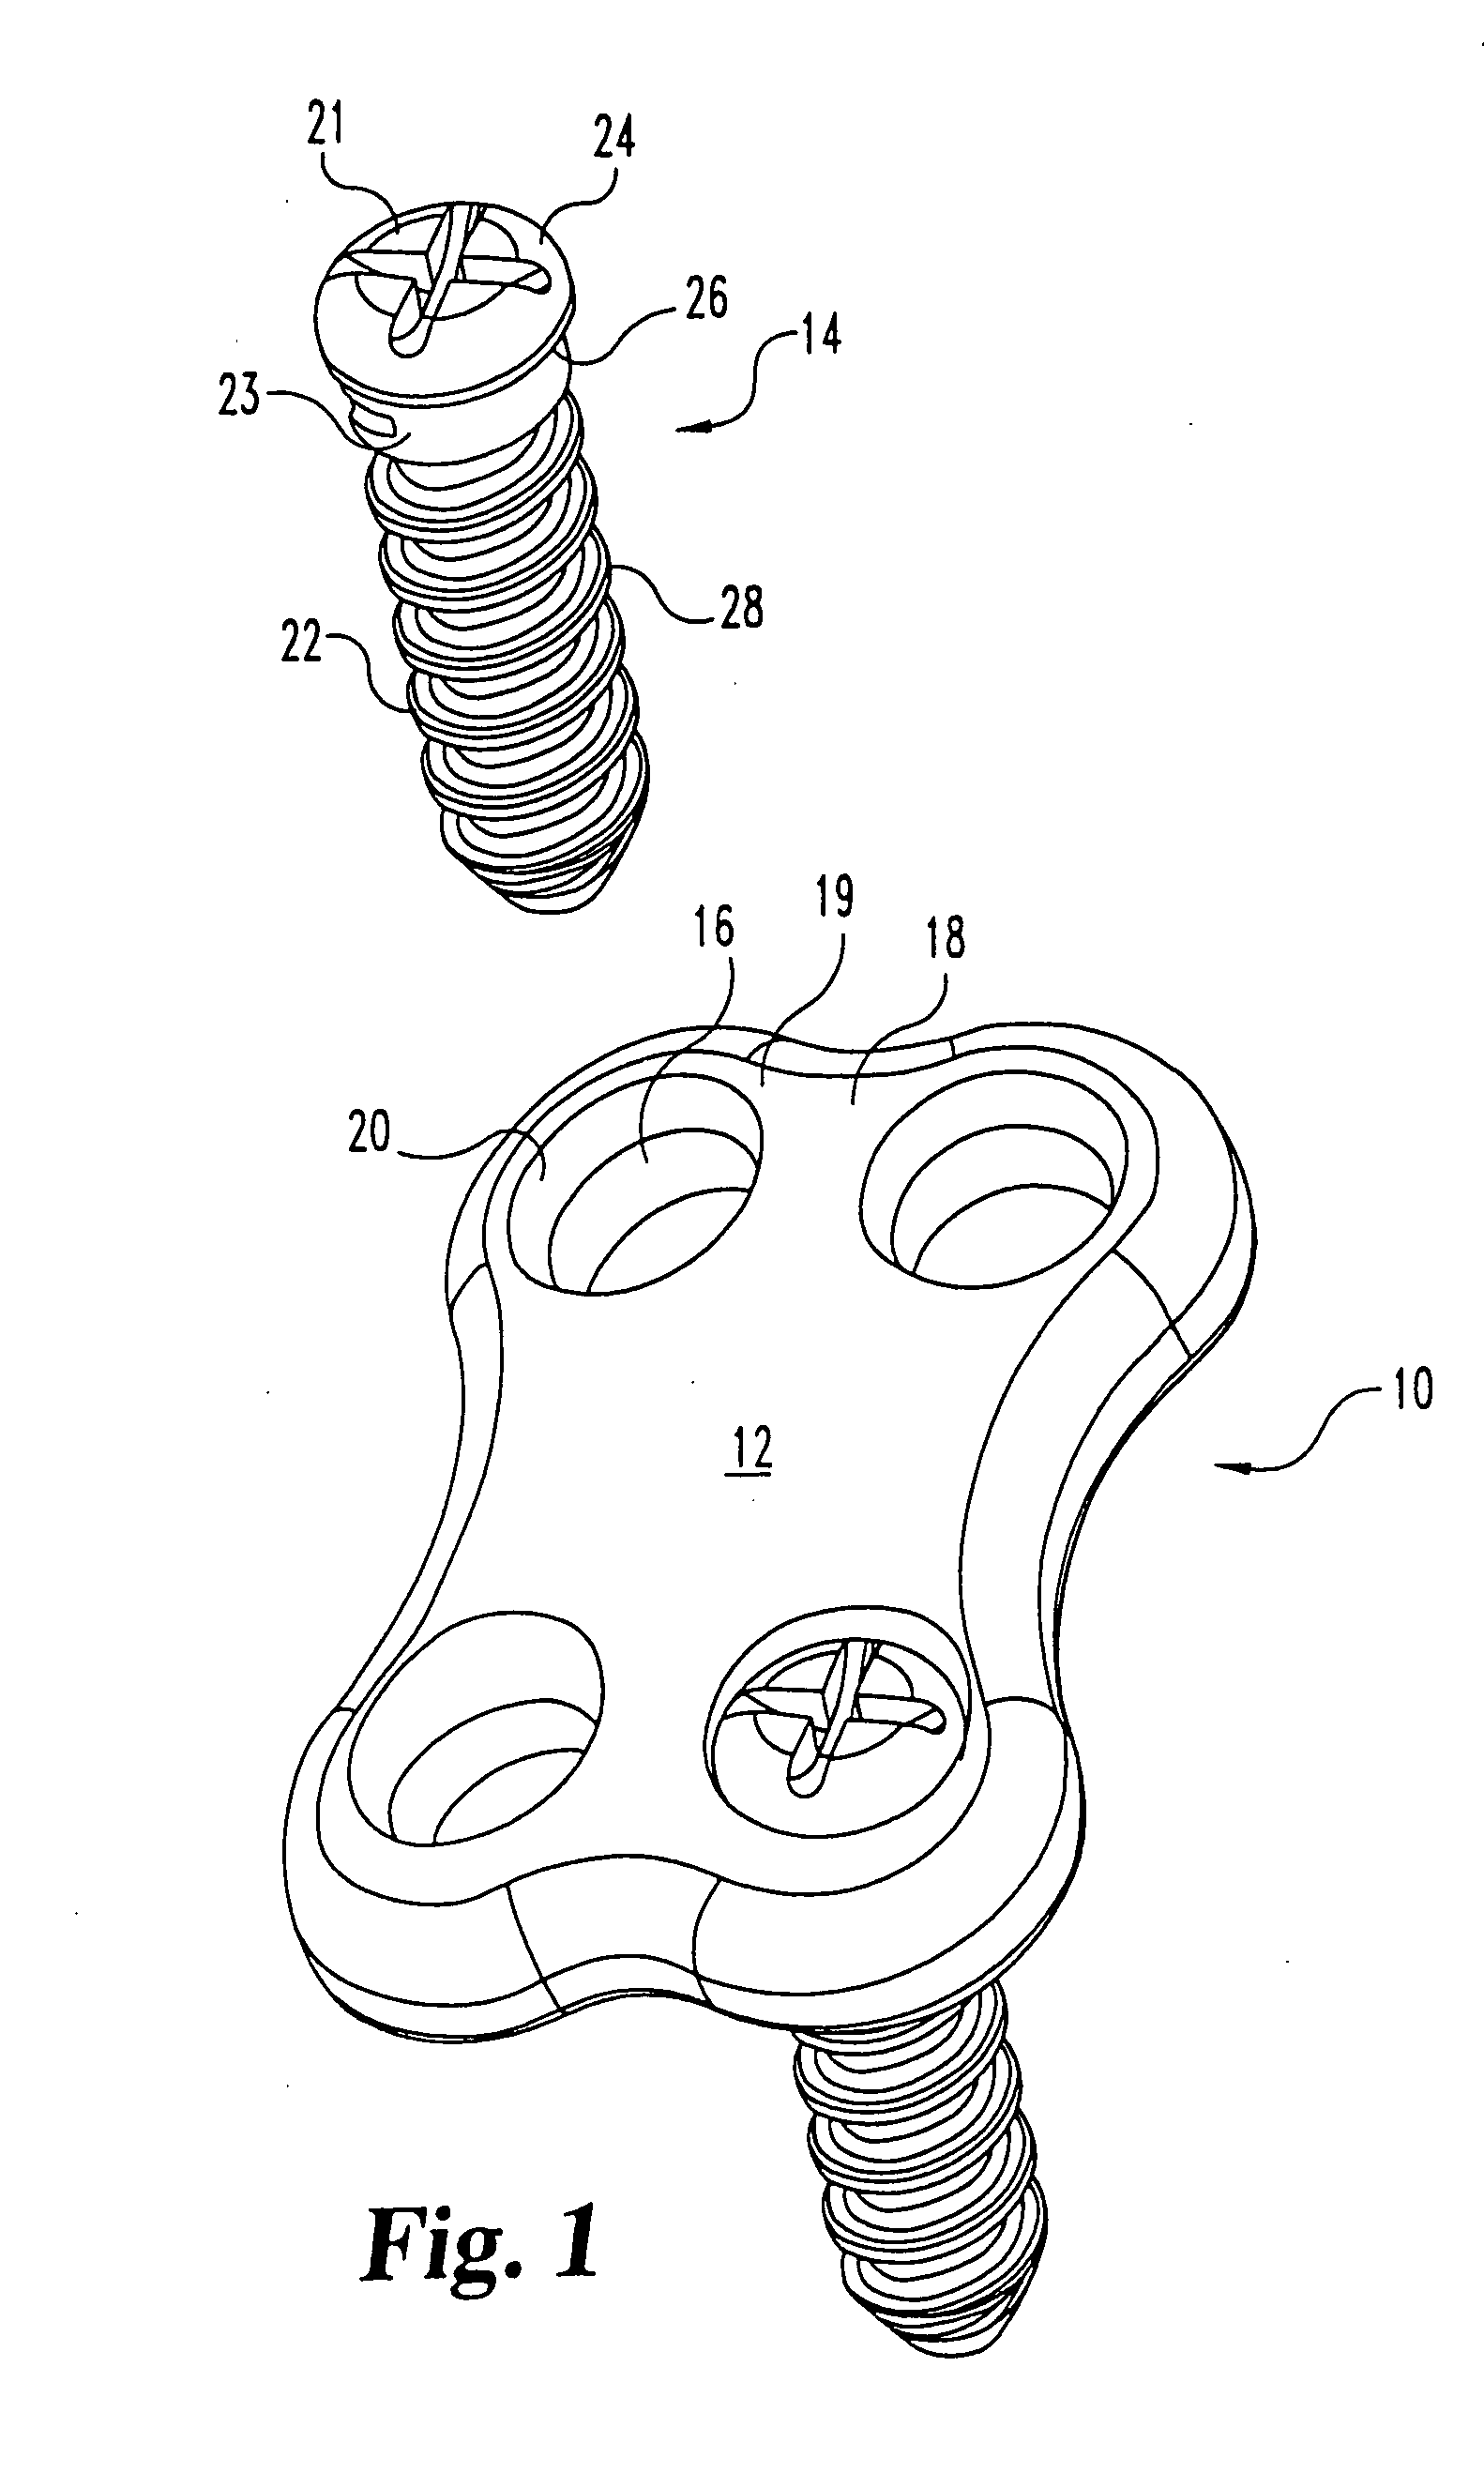 Non-metallic implant devices and intra-operative methods for assembly and fixation